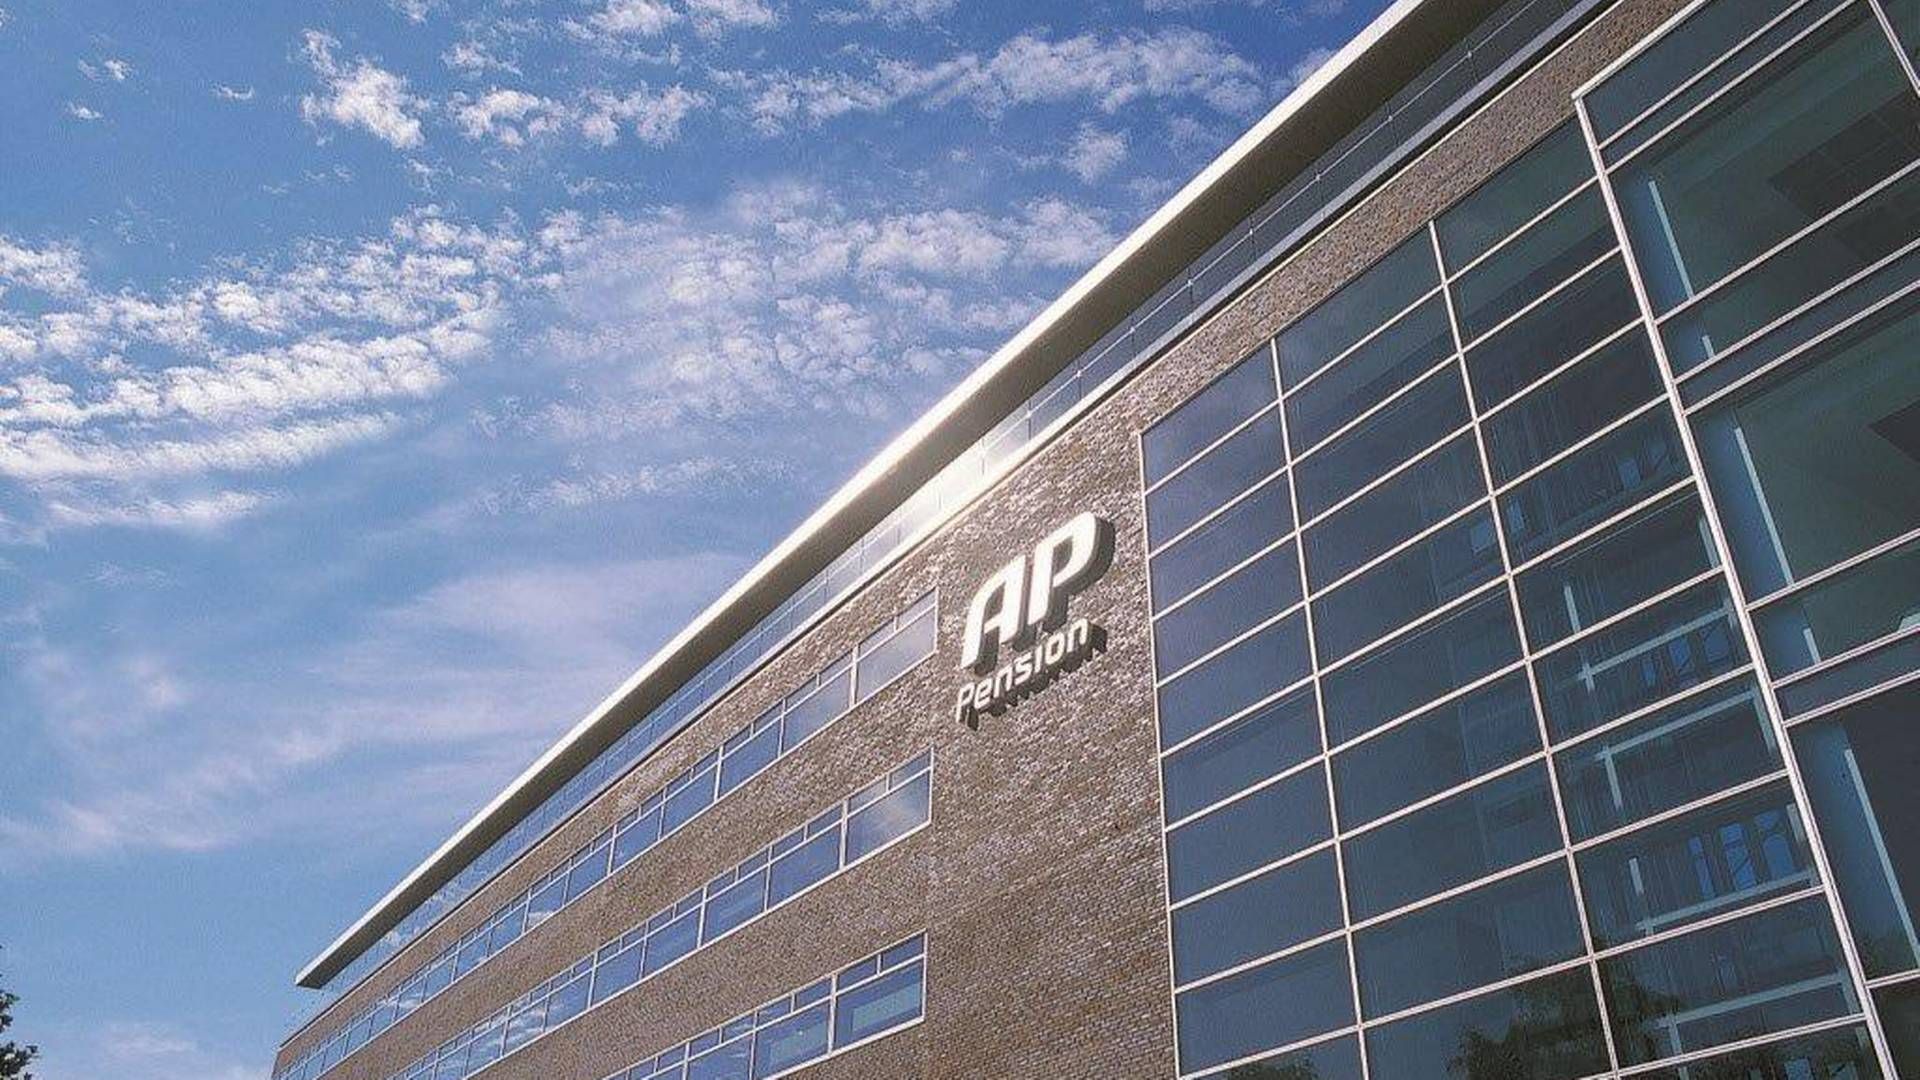 AP Pension was founded in 1919 and has roots in the Danish cooperative movement. | Photo: Ap Pension/pr